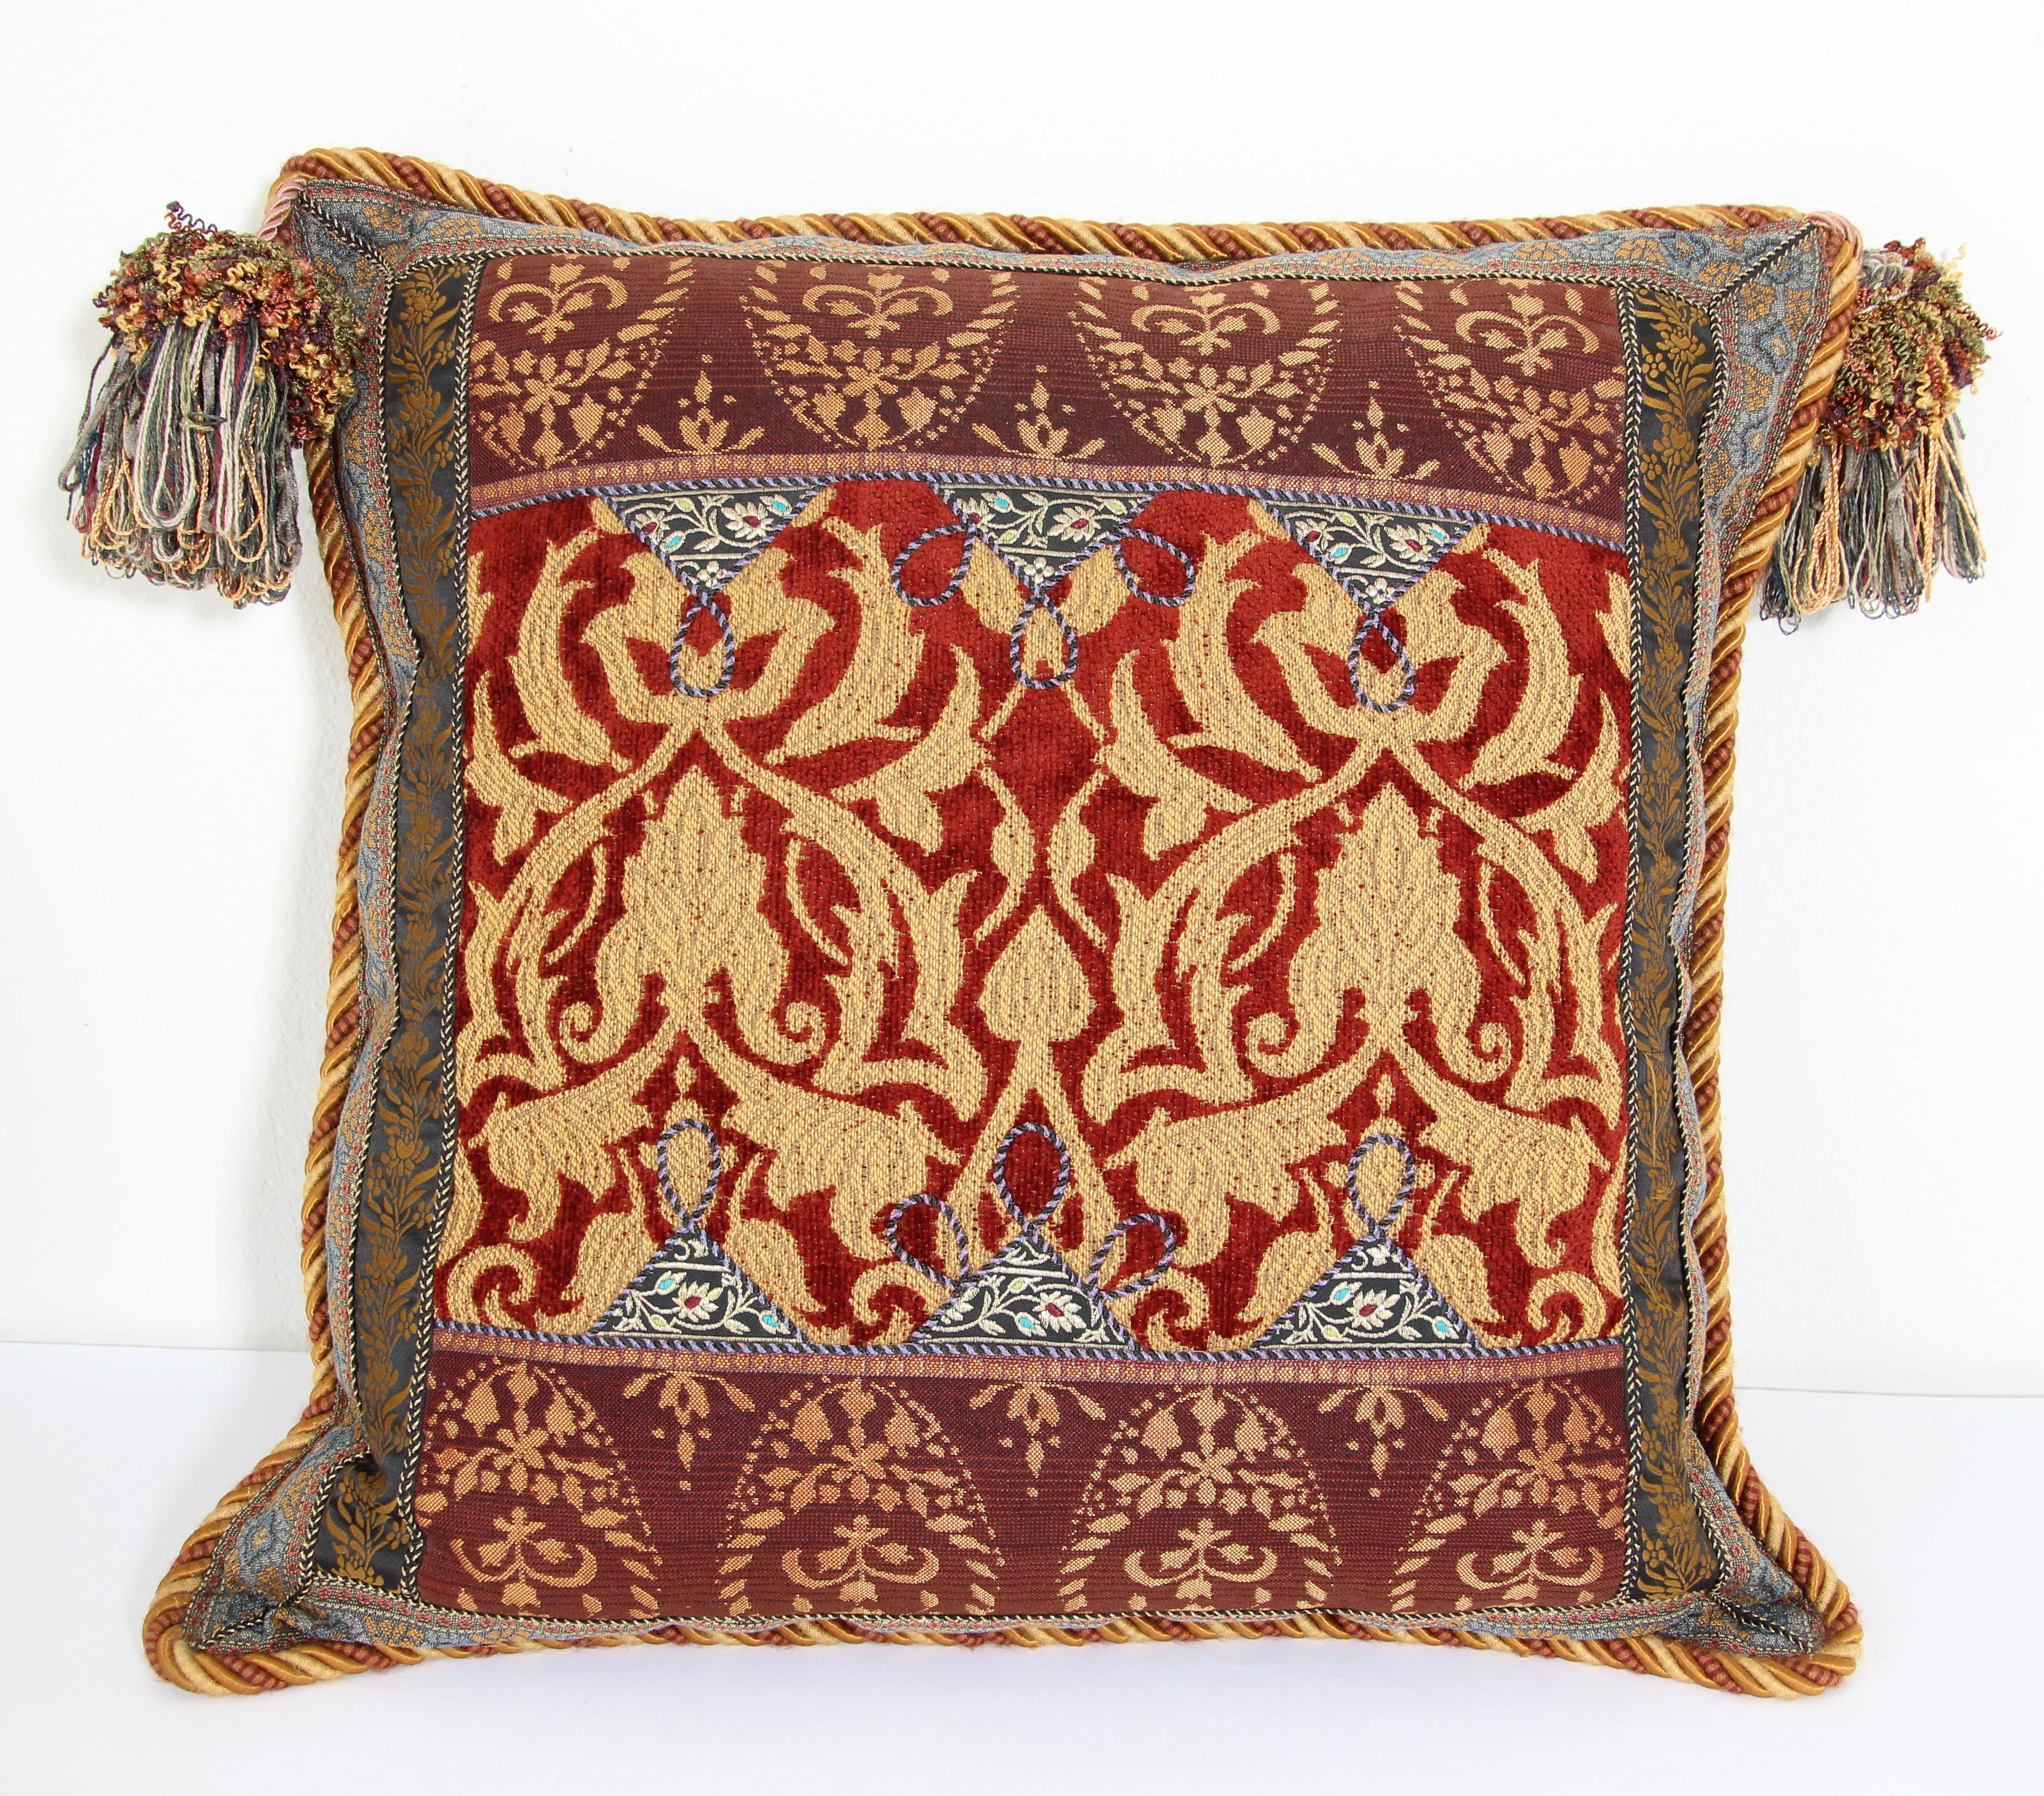 Middle Eastern Moorish decorative throw pillow and tapestry.
Luxury silk velvet textile fragment in Venetian Fortuny style fabric in red and blue with decorative silk trim applied to finish the edges.
Blue Moorish arches embroidery decorated with